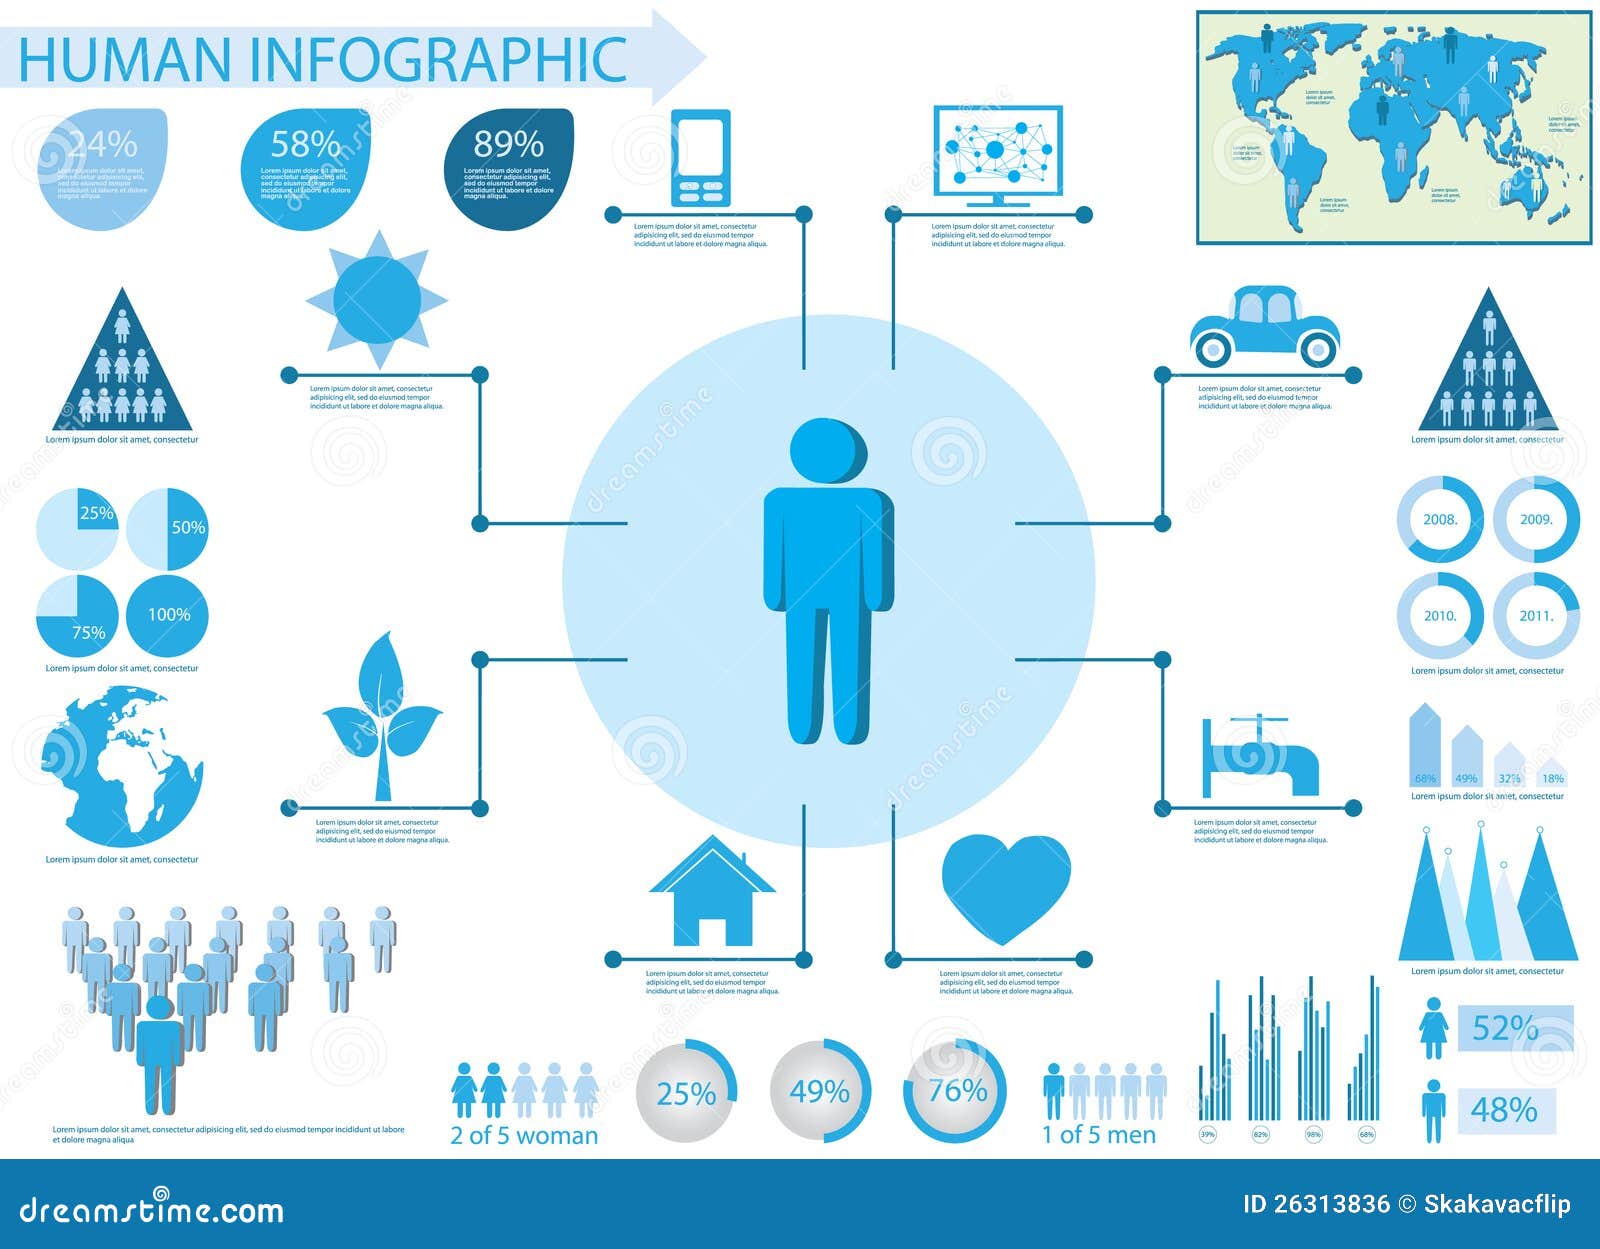 Human Info Graphic Elements Royalty Free Stock Image